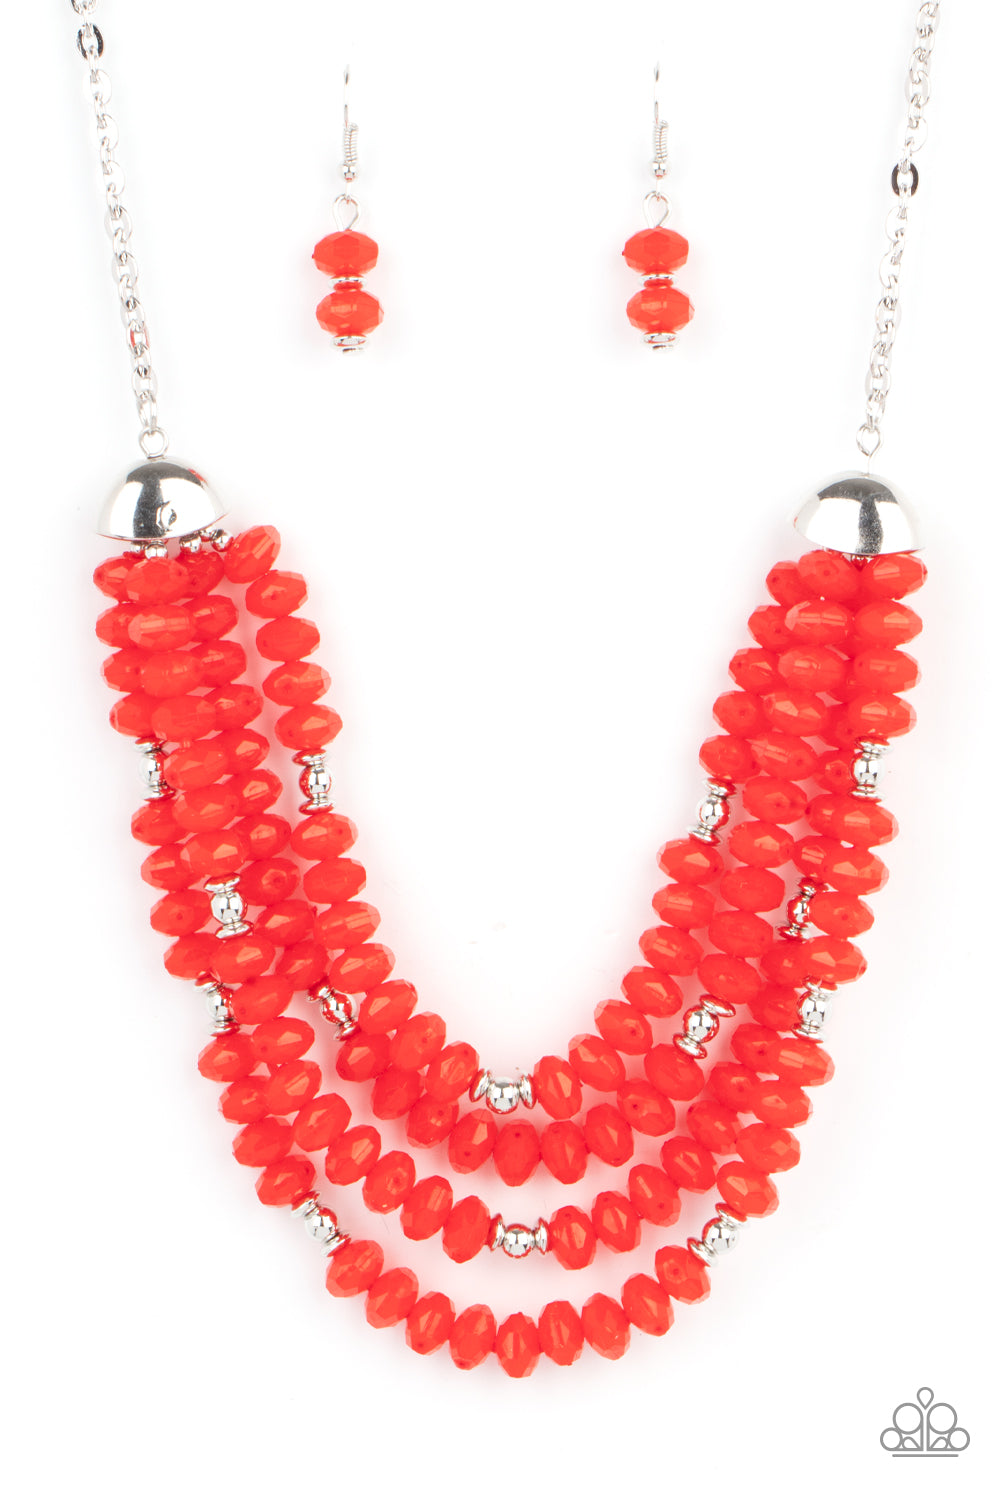 Paparazzi Accessories Best POSH-IBLE Taste - Red Necklaces - Lady T Accessories